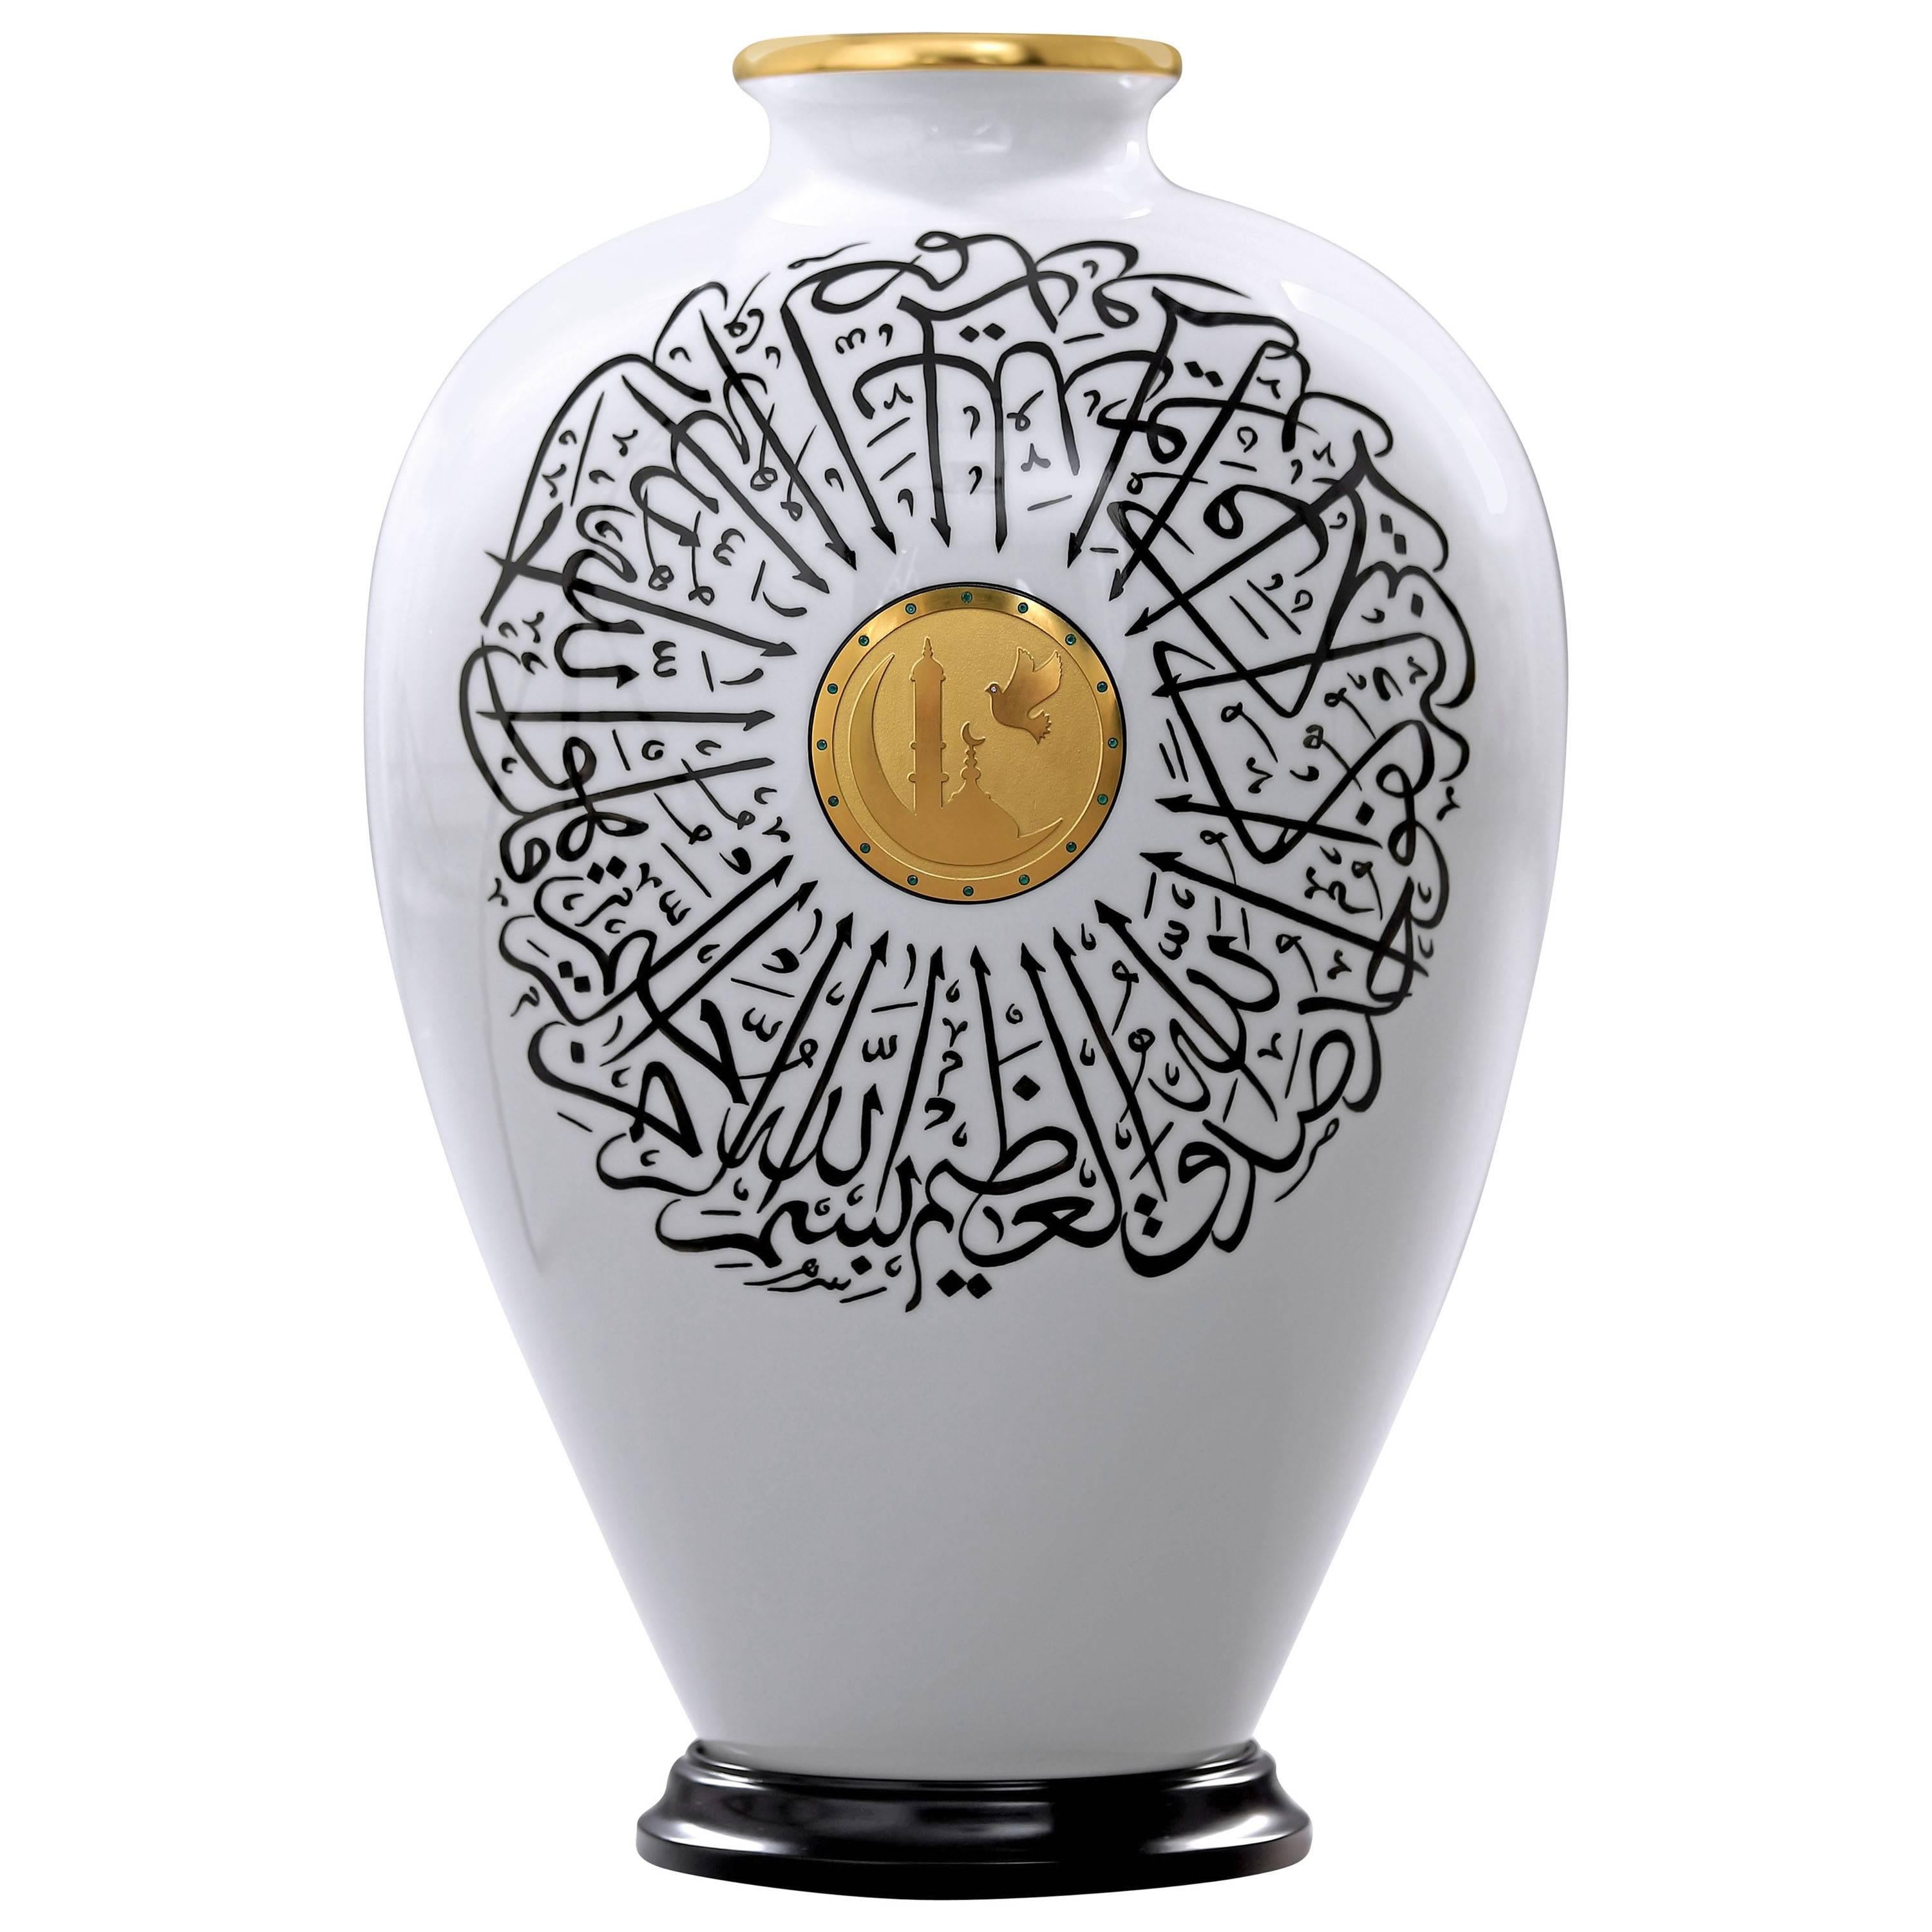 Porcelain Vase 24-Carat Gold Plating 16 Emeralds and a Brilliant by P. Nebengaus